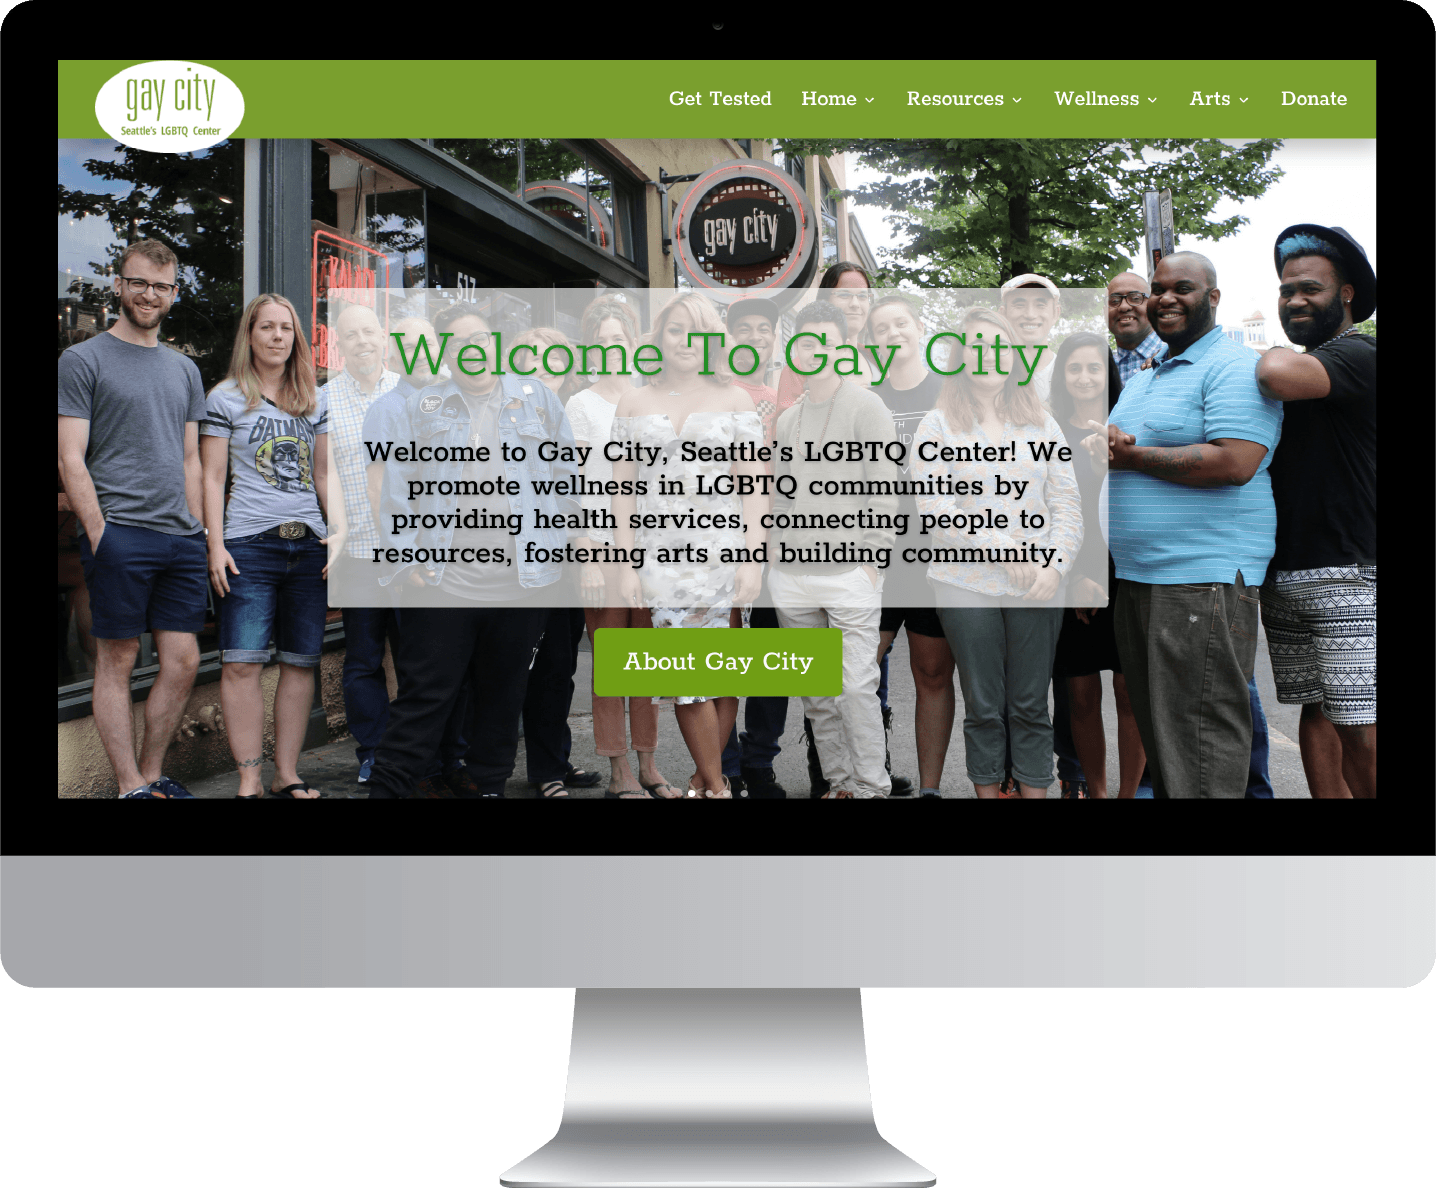 High fidelity mock up of the Gay City Landing Page. This picture is here to accompany the overview description.